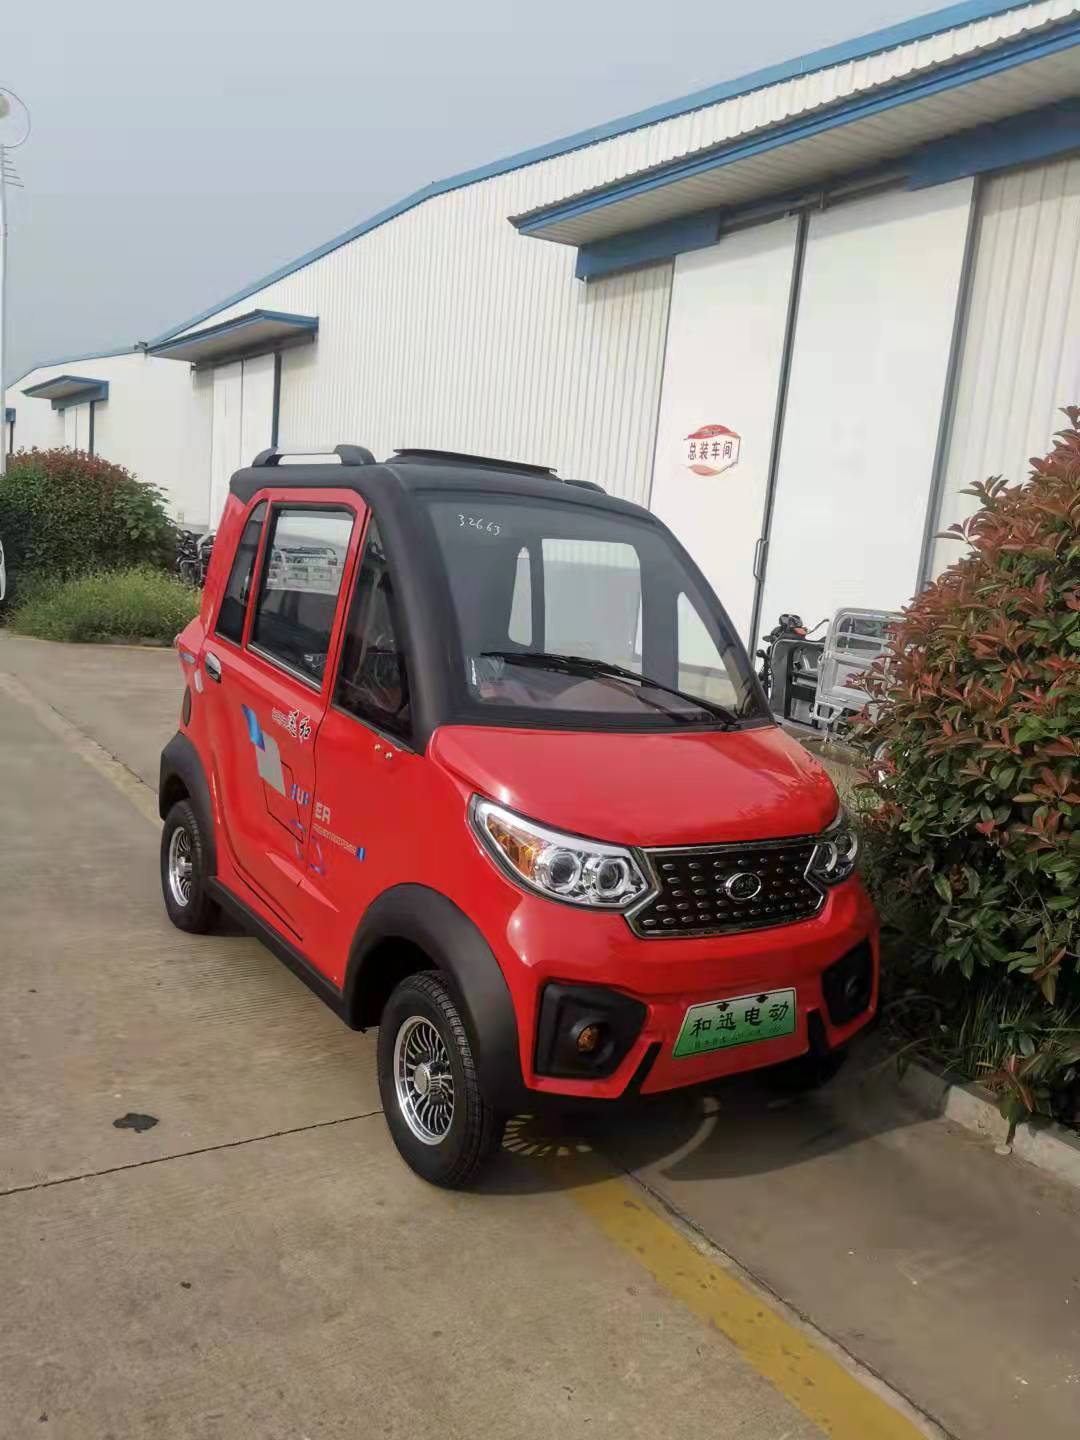 Good Quality Cheap 4 Wheel Adult Mini Electric Car For Family Use From China